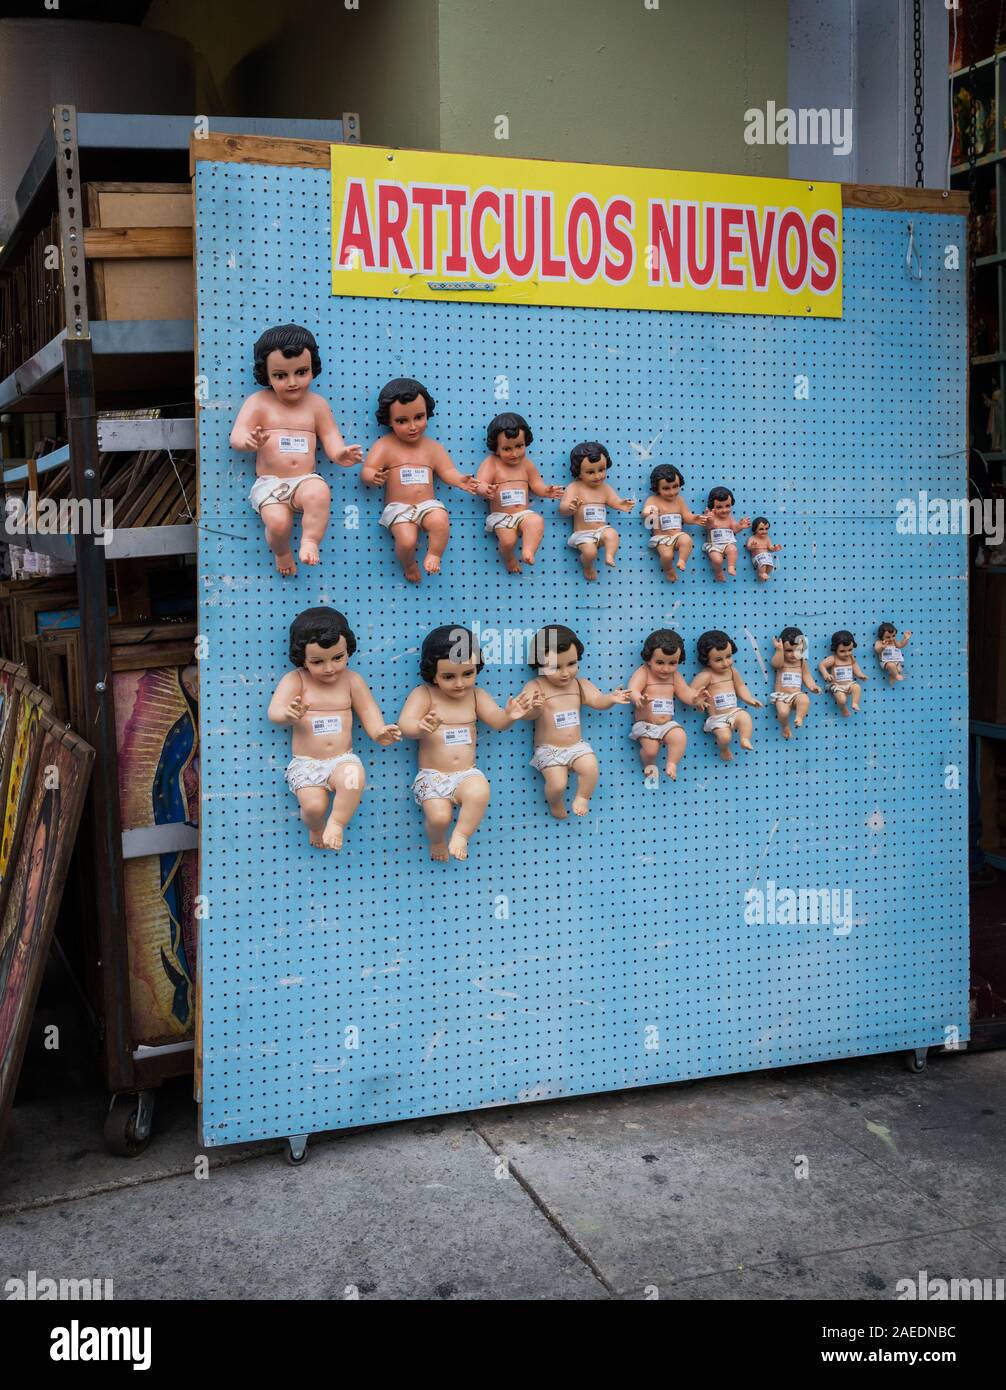 Rows of baby Jesus figures on display at a store in Downtown Los Angeles, California, below sign, in Spanish, reading: "Articulos Nuevos" (new items). Stock Photo